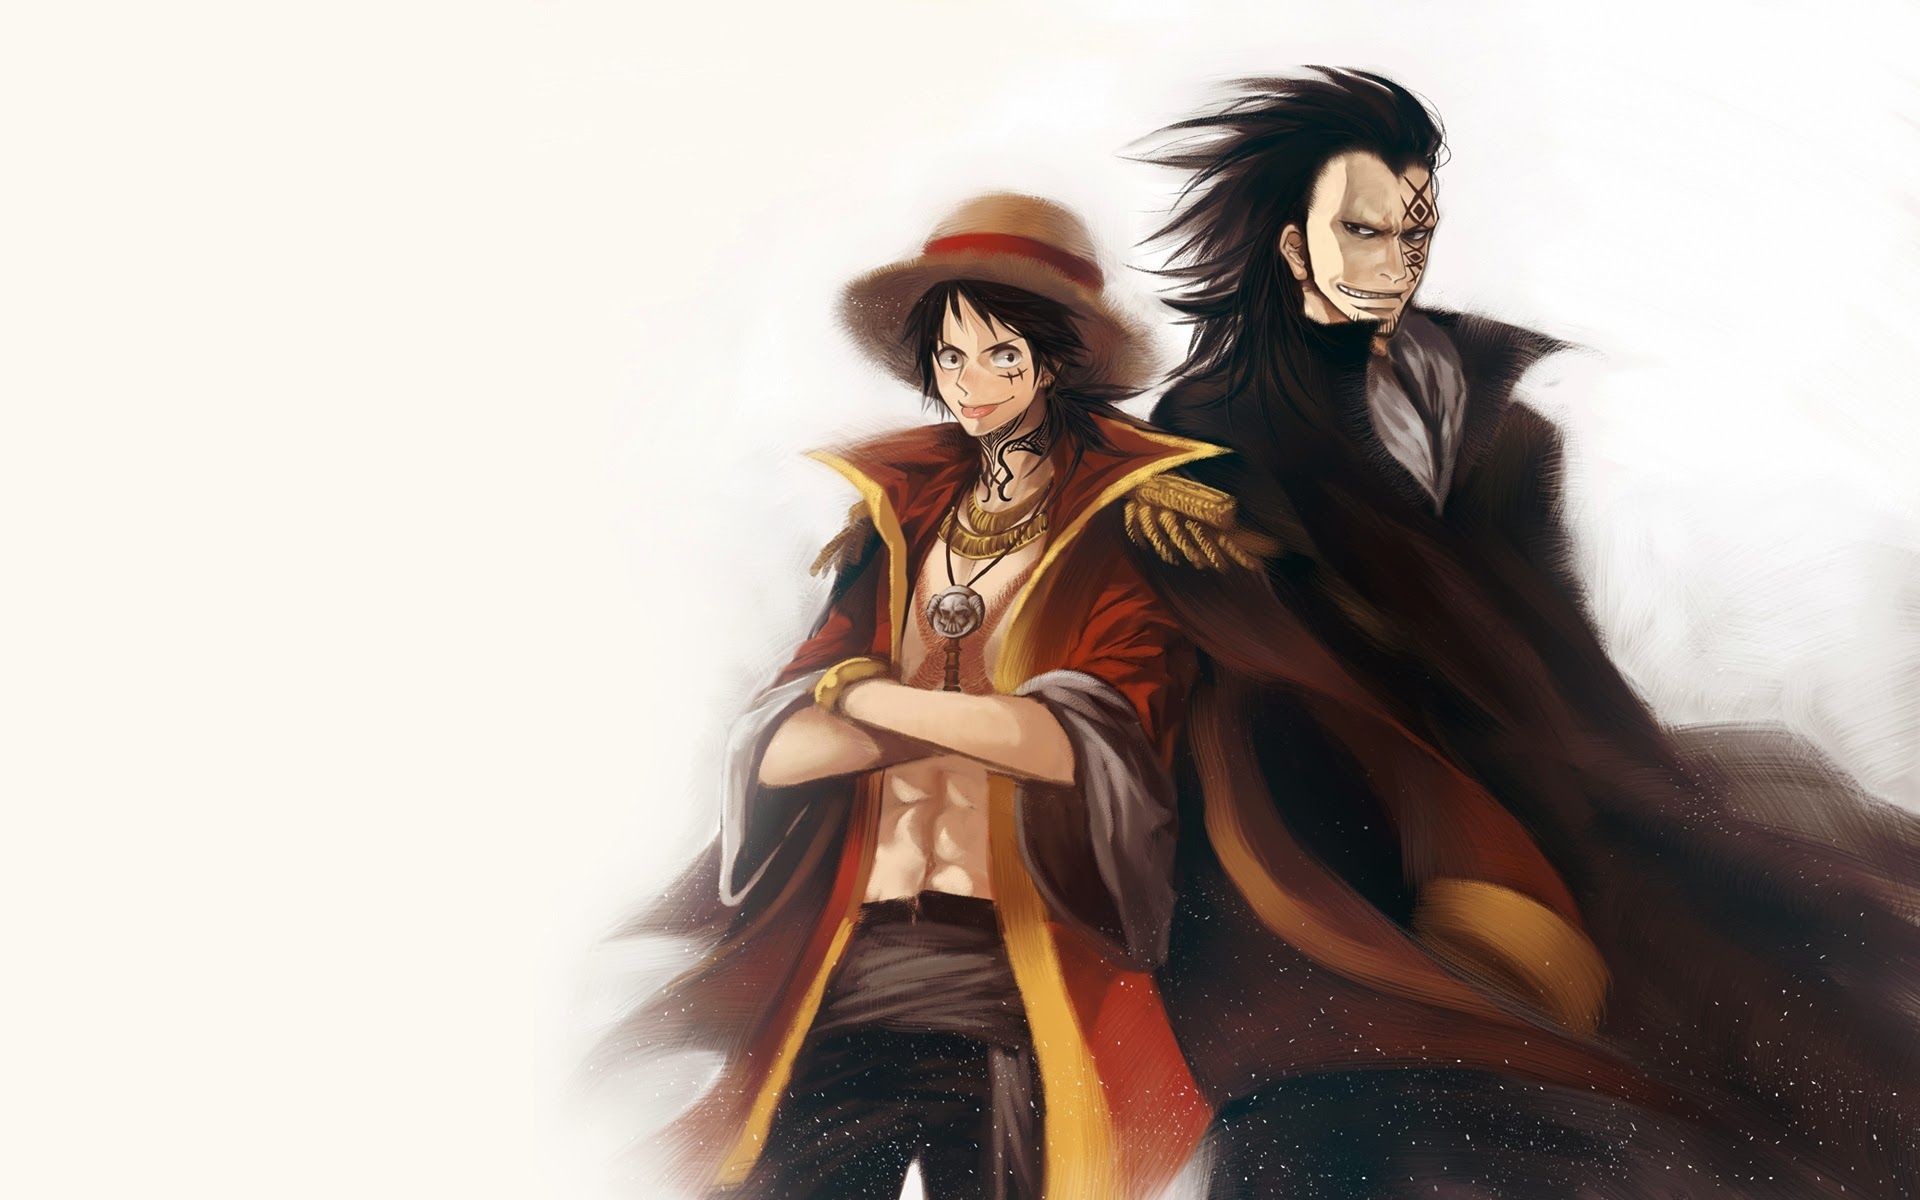 HD desktop wallpaper: Anime, One Piece, Monkey D Luffy, Shanks (One Piece)  download free picture #1153975